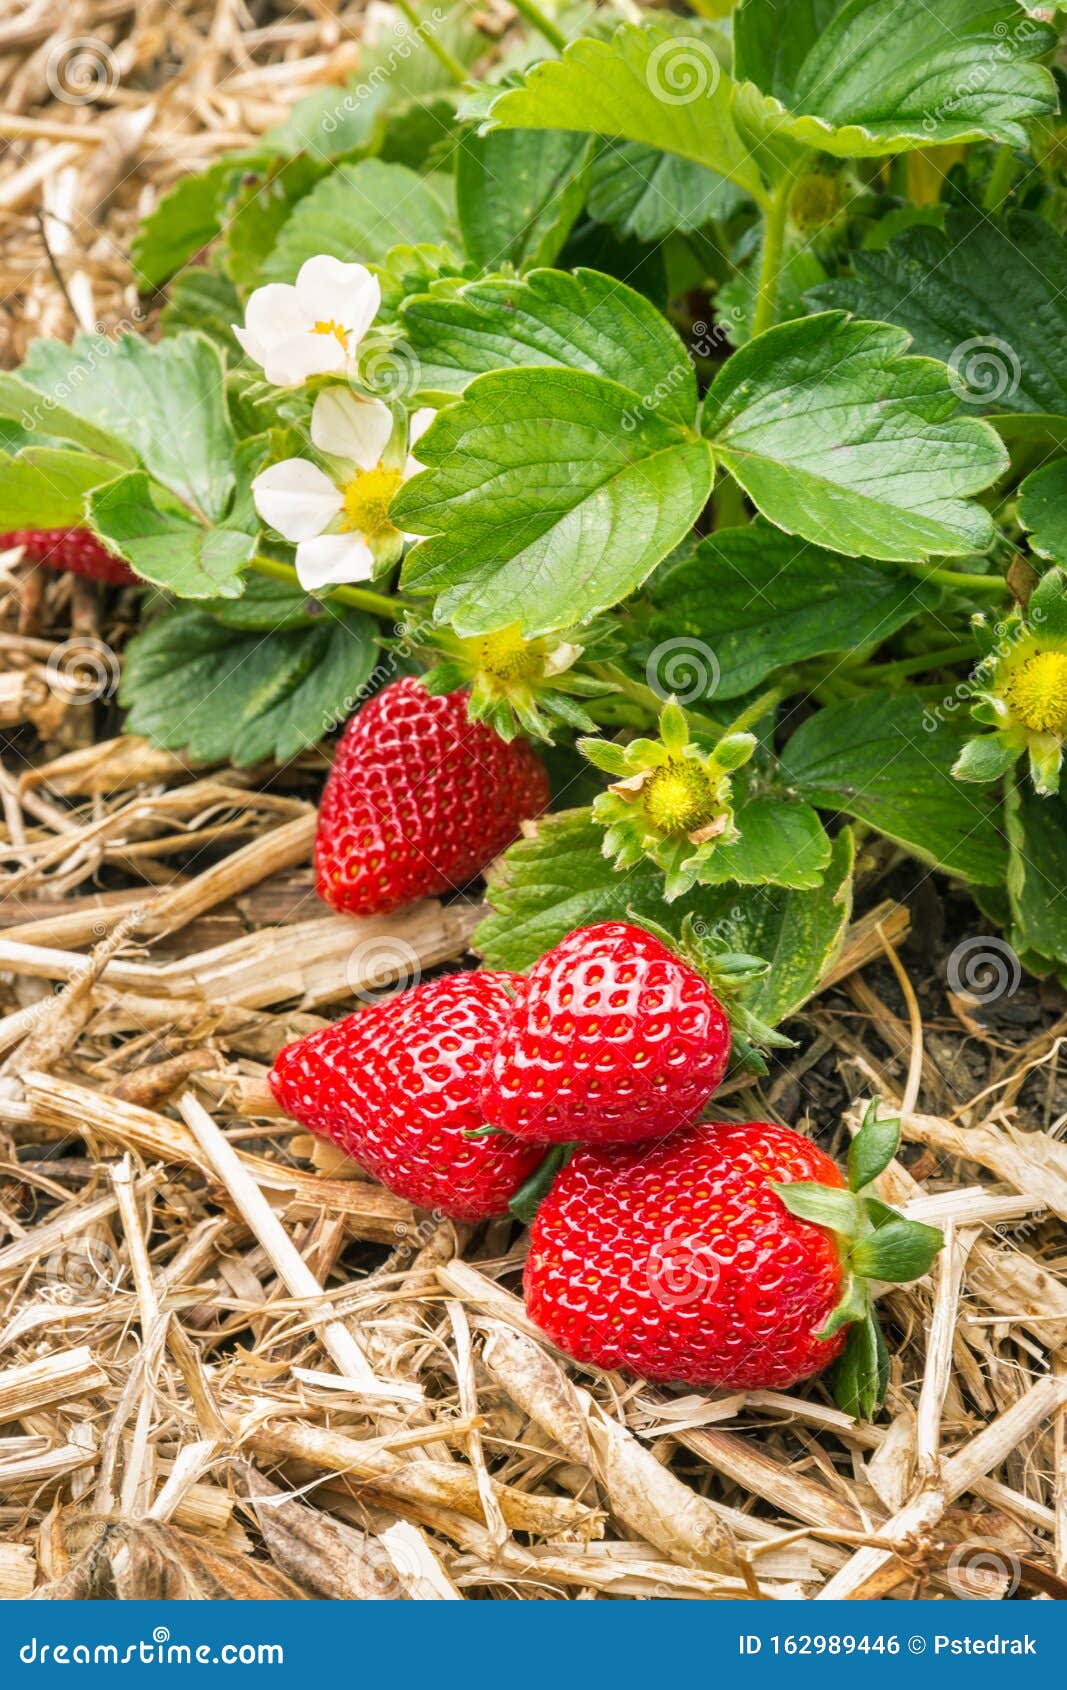 strawberry plant with ripe strawberries growing on straw in organic garden